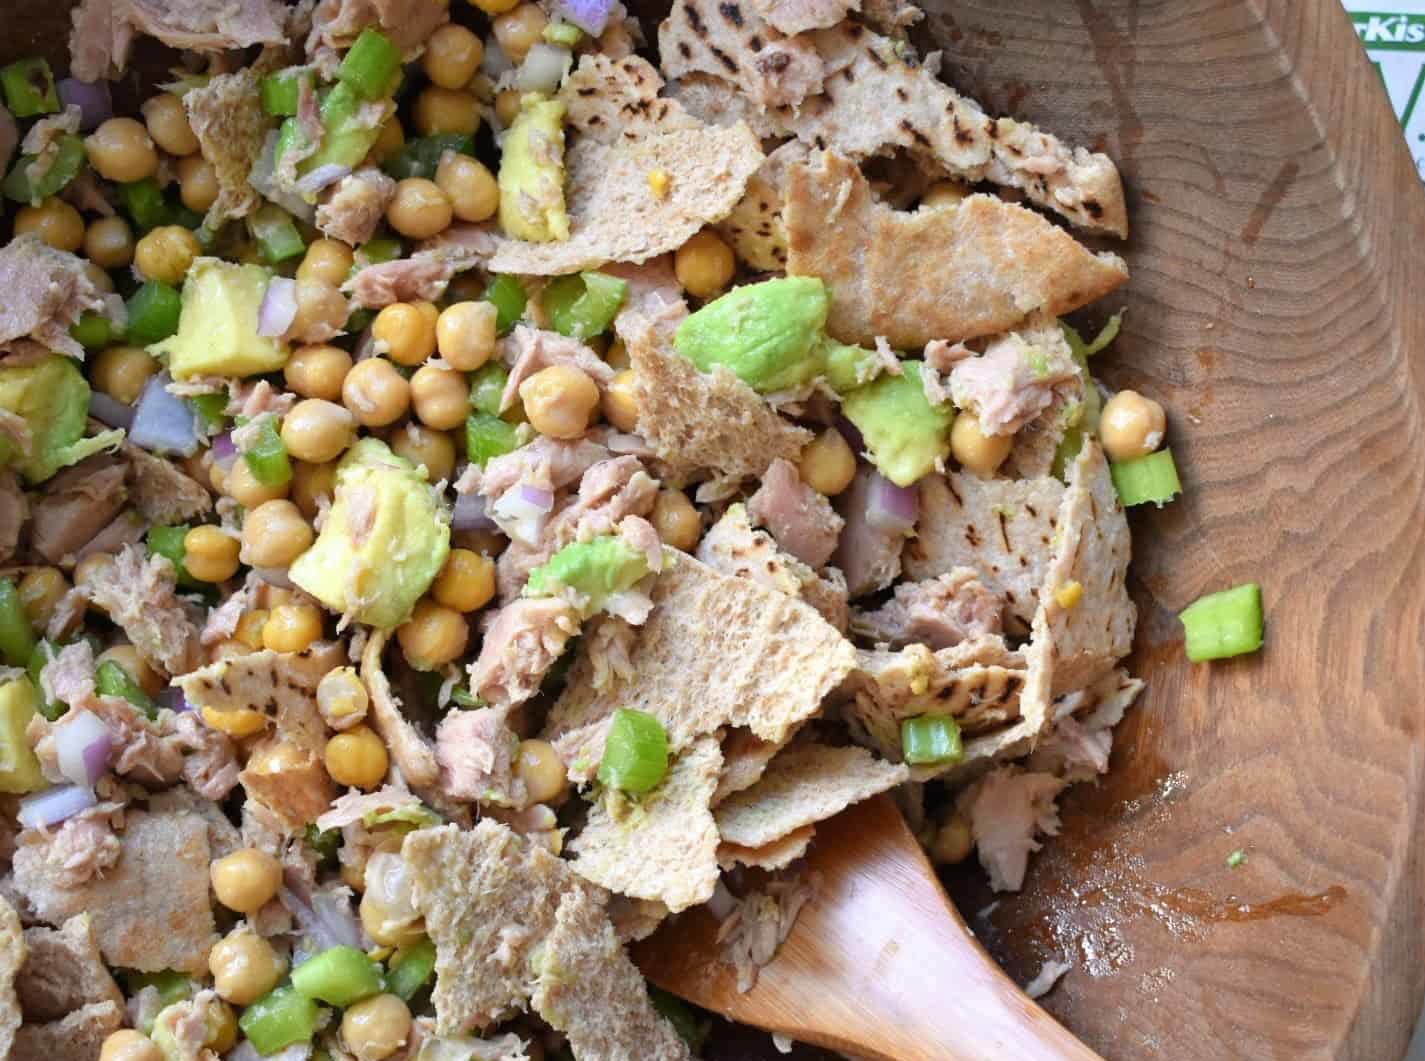 Chickpea tuna salad in a bowl with a wooden spoon